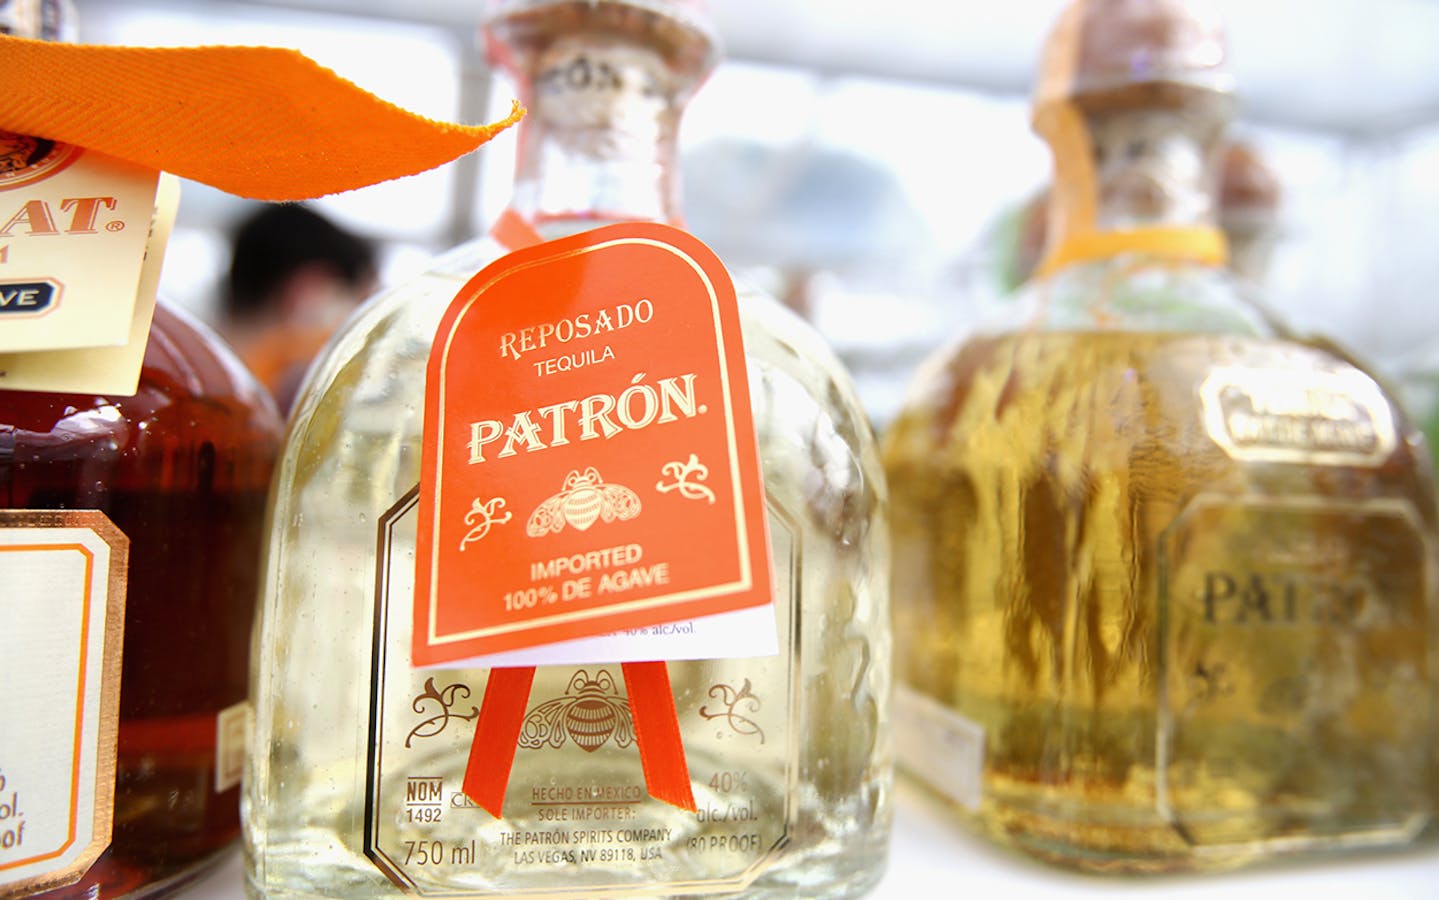 https://img.texasmonthly.com/2018/01/180125_PatronTequila.jpg?auto=compress&crop=faces&fit=crop&fm=jpg&h=900&ixlib=php-3.3.1&q=45&w=1600